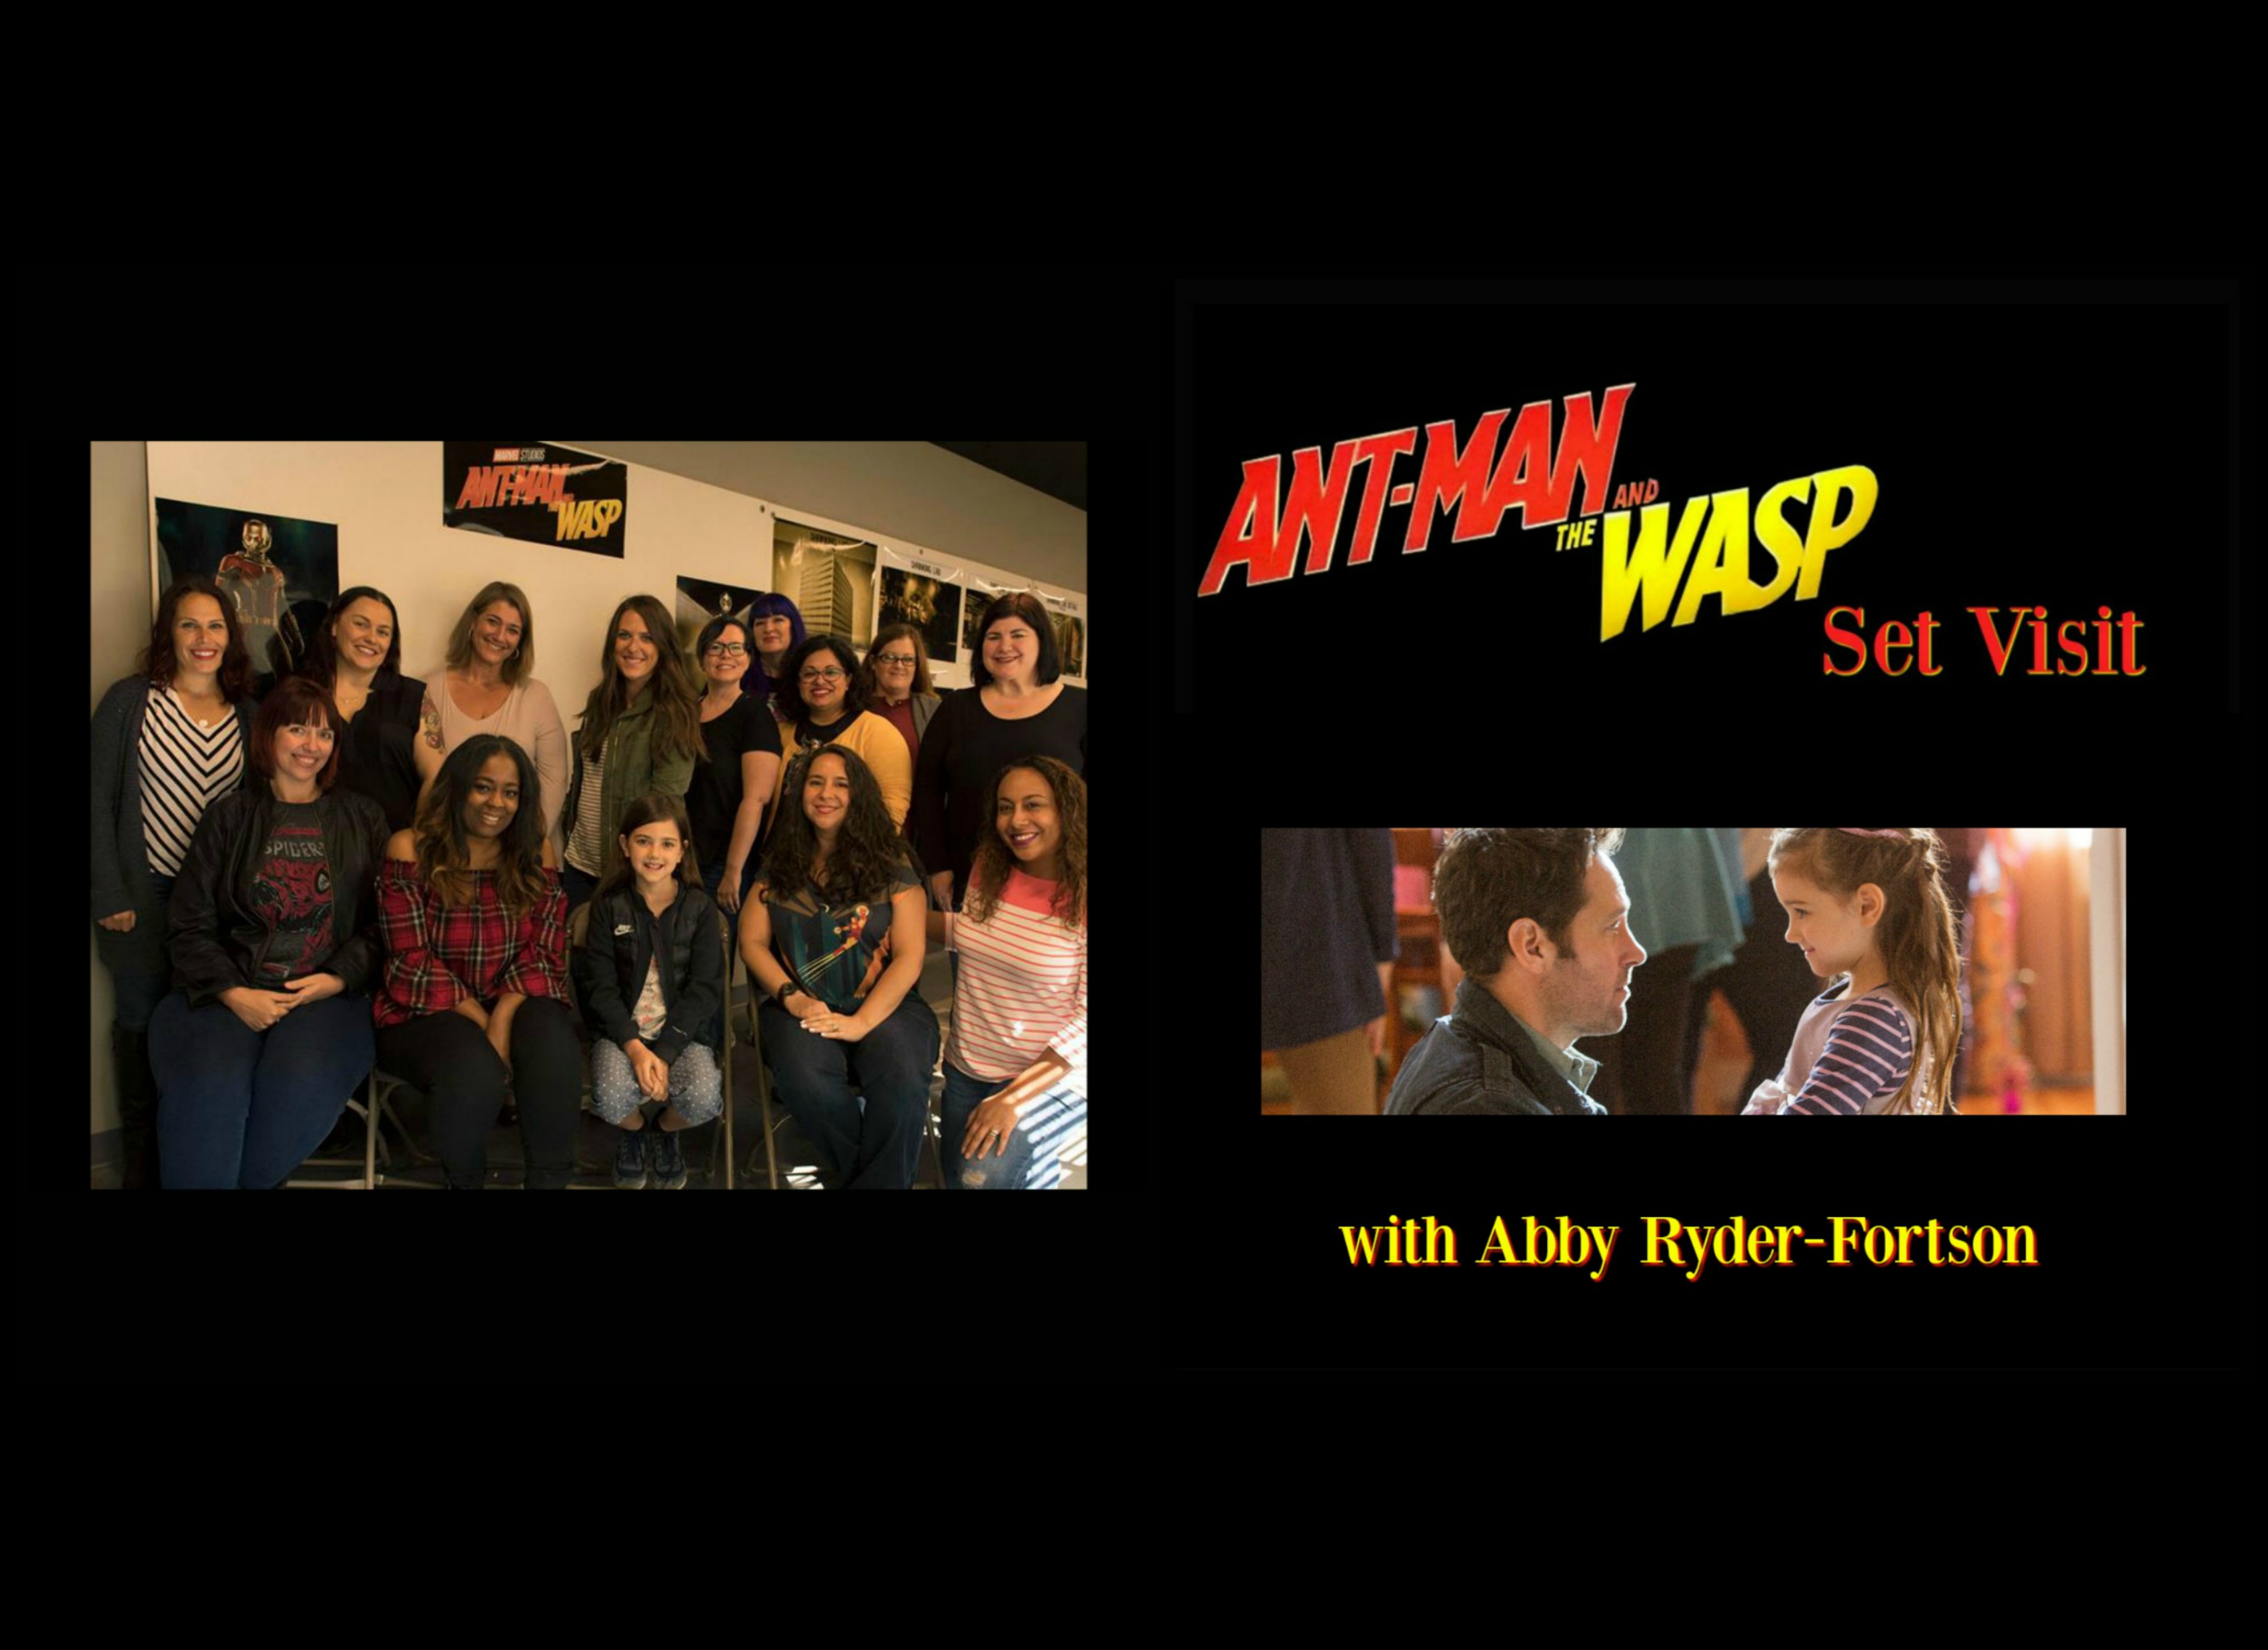 Ant-Man and The Wasp Interview with Abby Ryder-Fortson